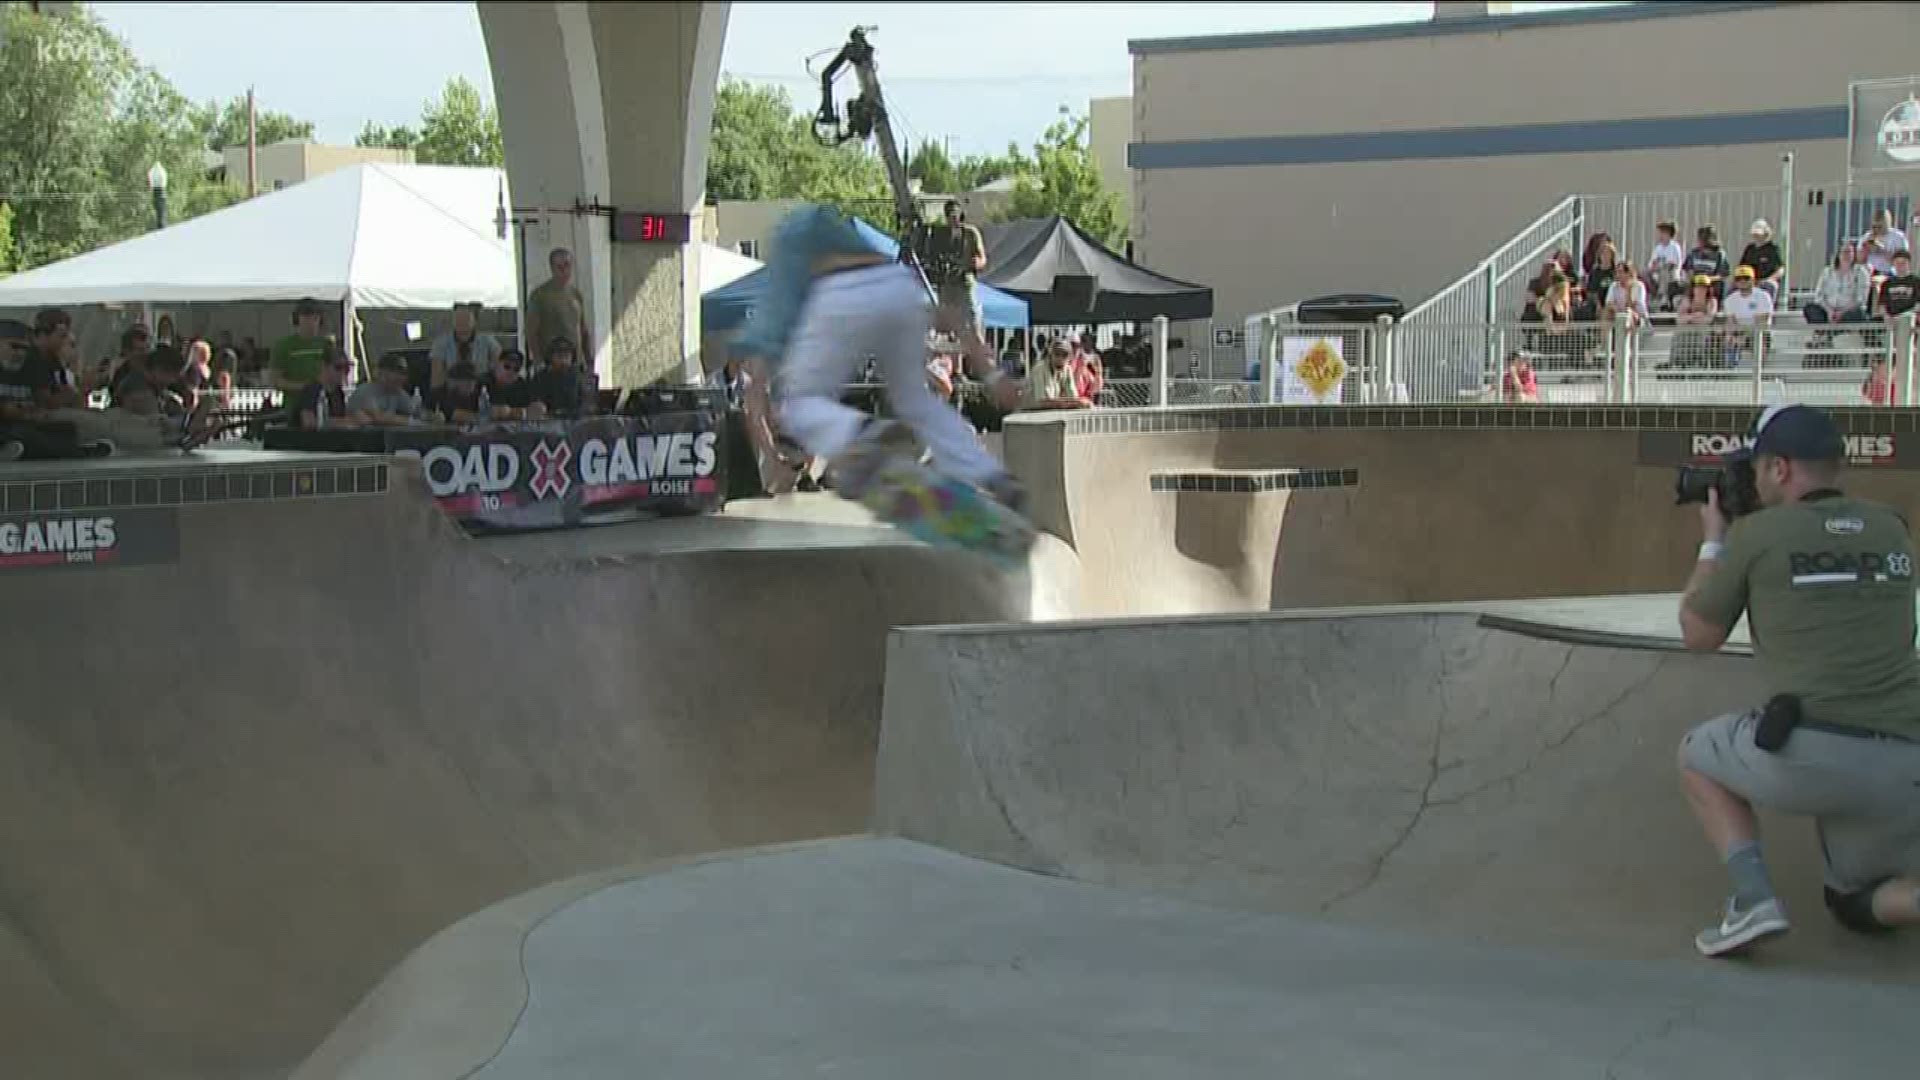 The event showcased some of the top skateboarders and BMX riders from all around the world.